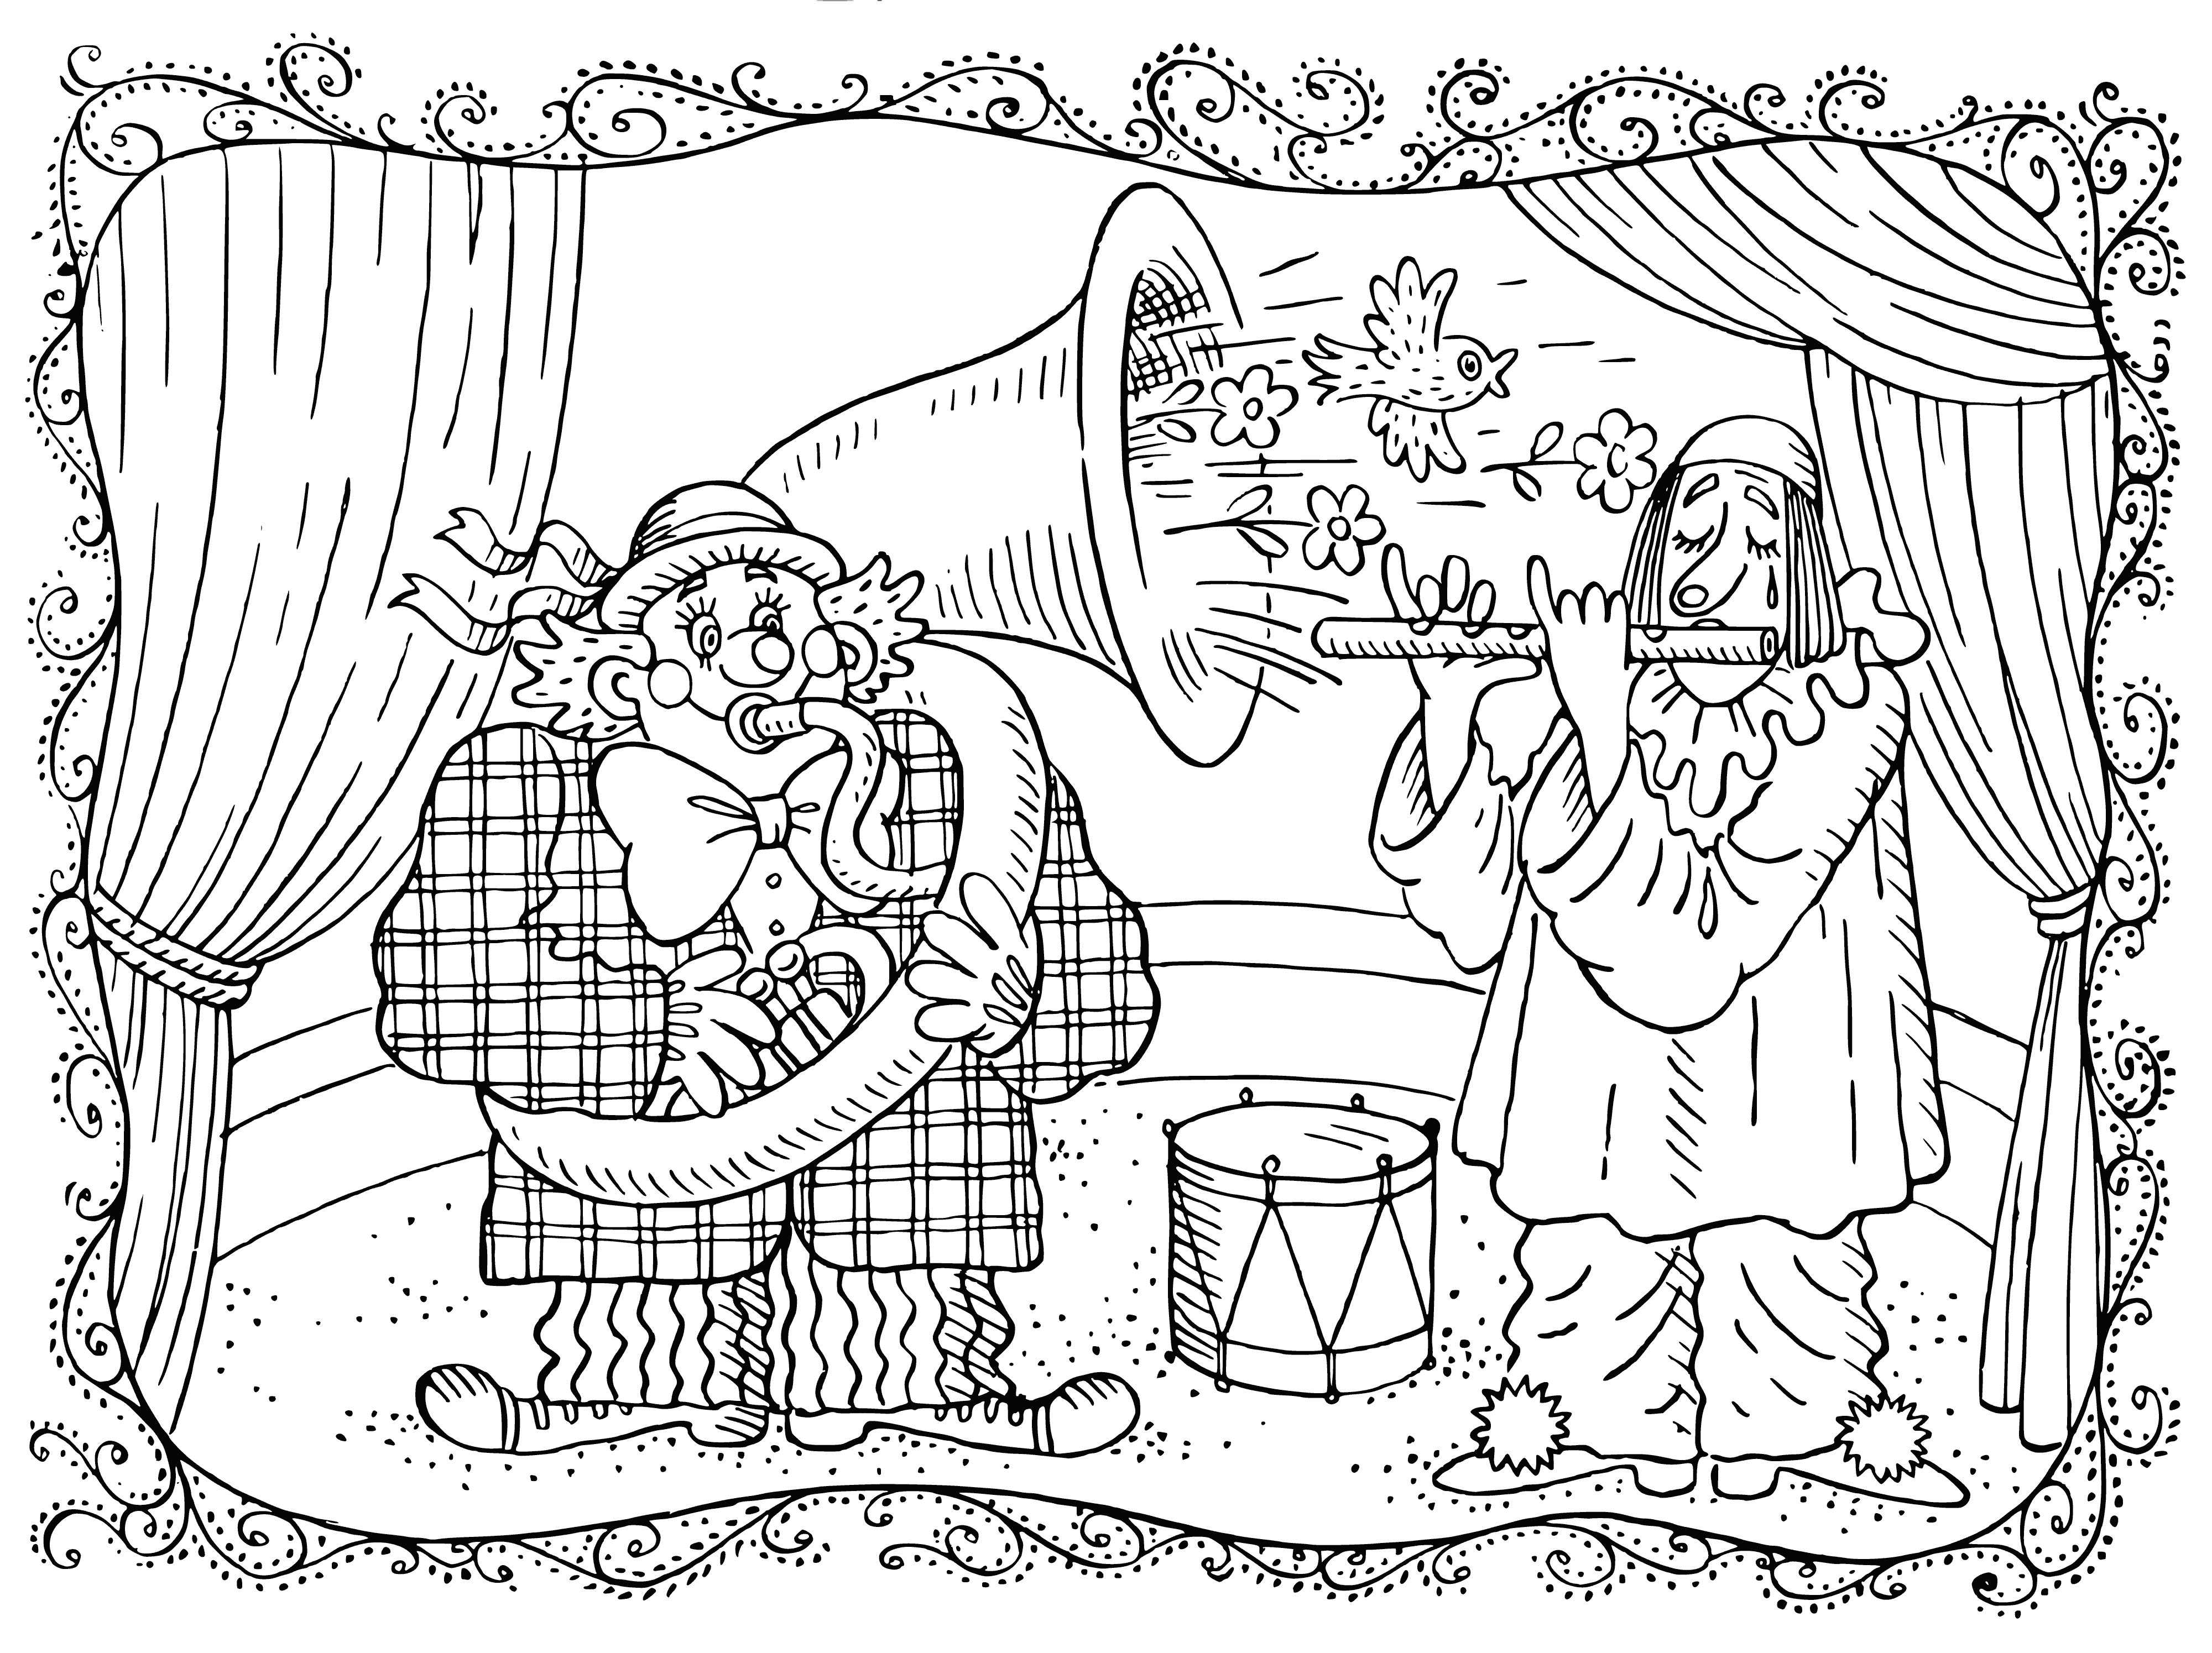 coloring page: Two musicians playing instruments in black clothes: a tuba and a flute. Coloring page for fun.